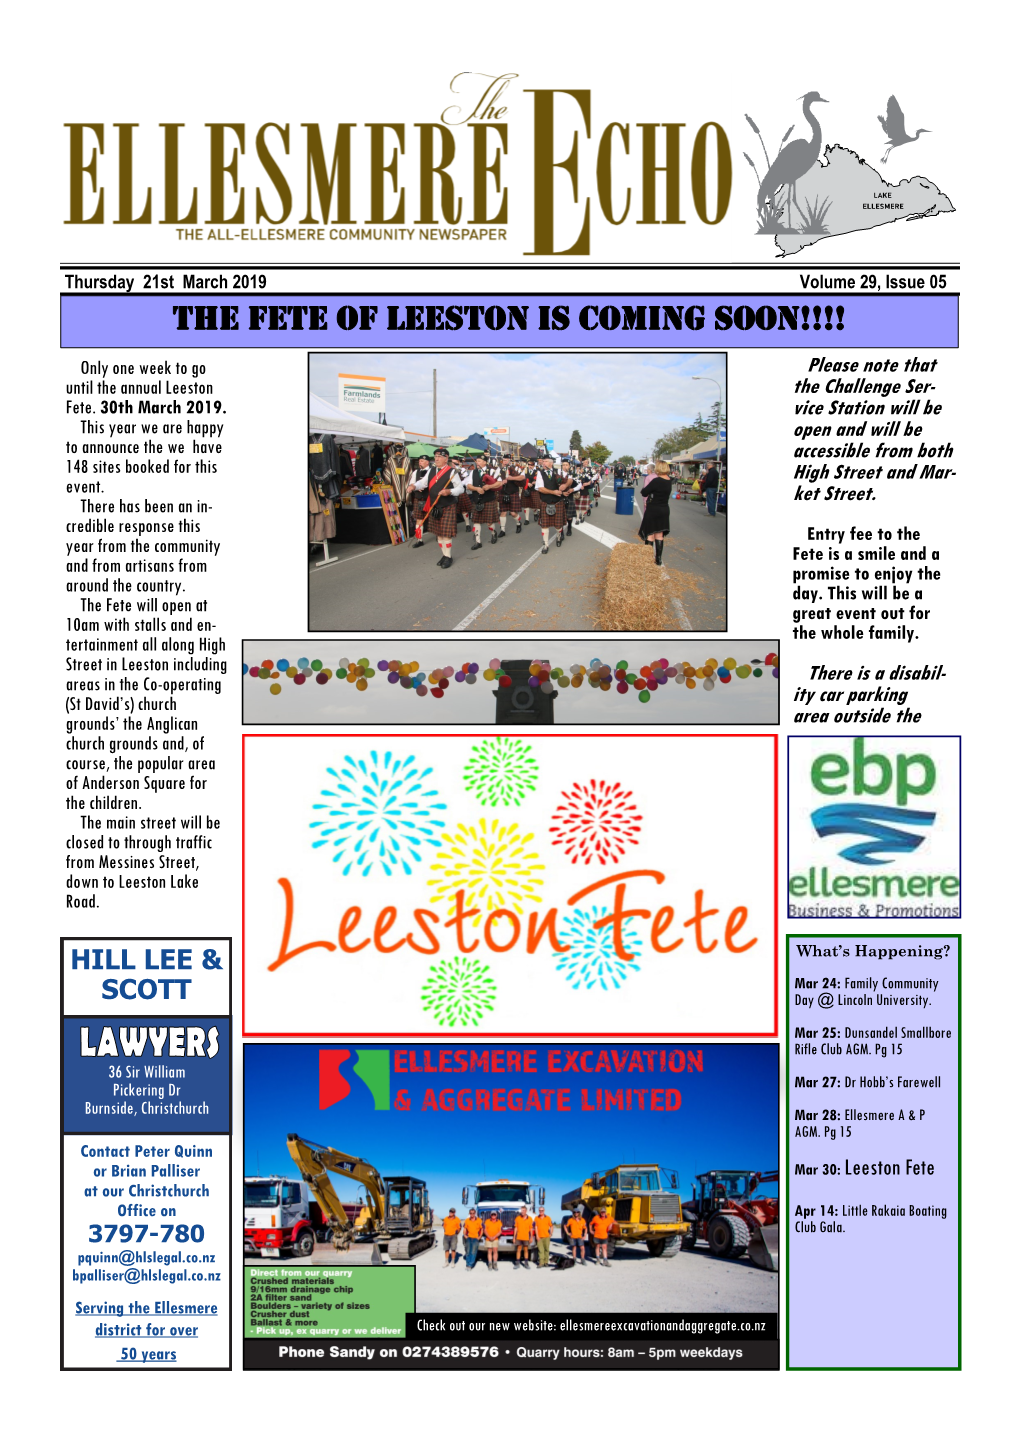 THE FETE of LEESTON IS COMING SOON!!!! Only One Week to Go Please Note That Until the Annual Leeston the Challenge Ser- Fete